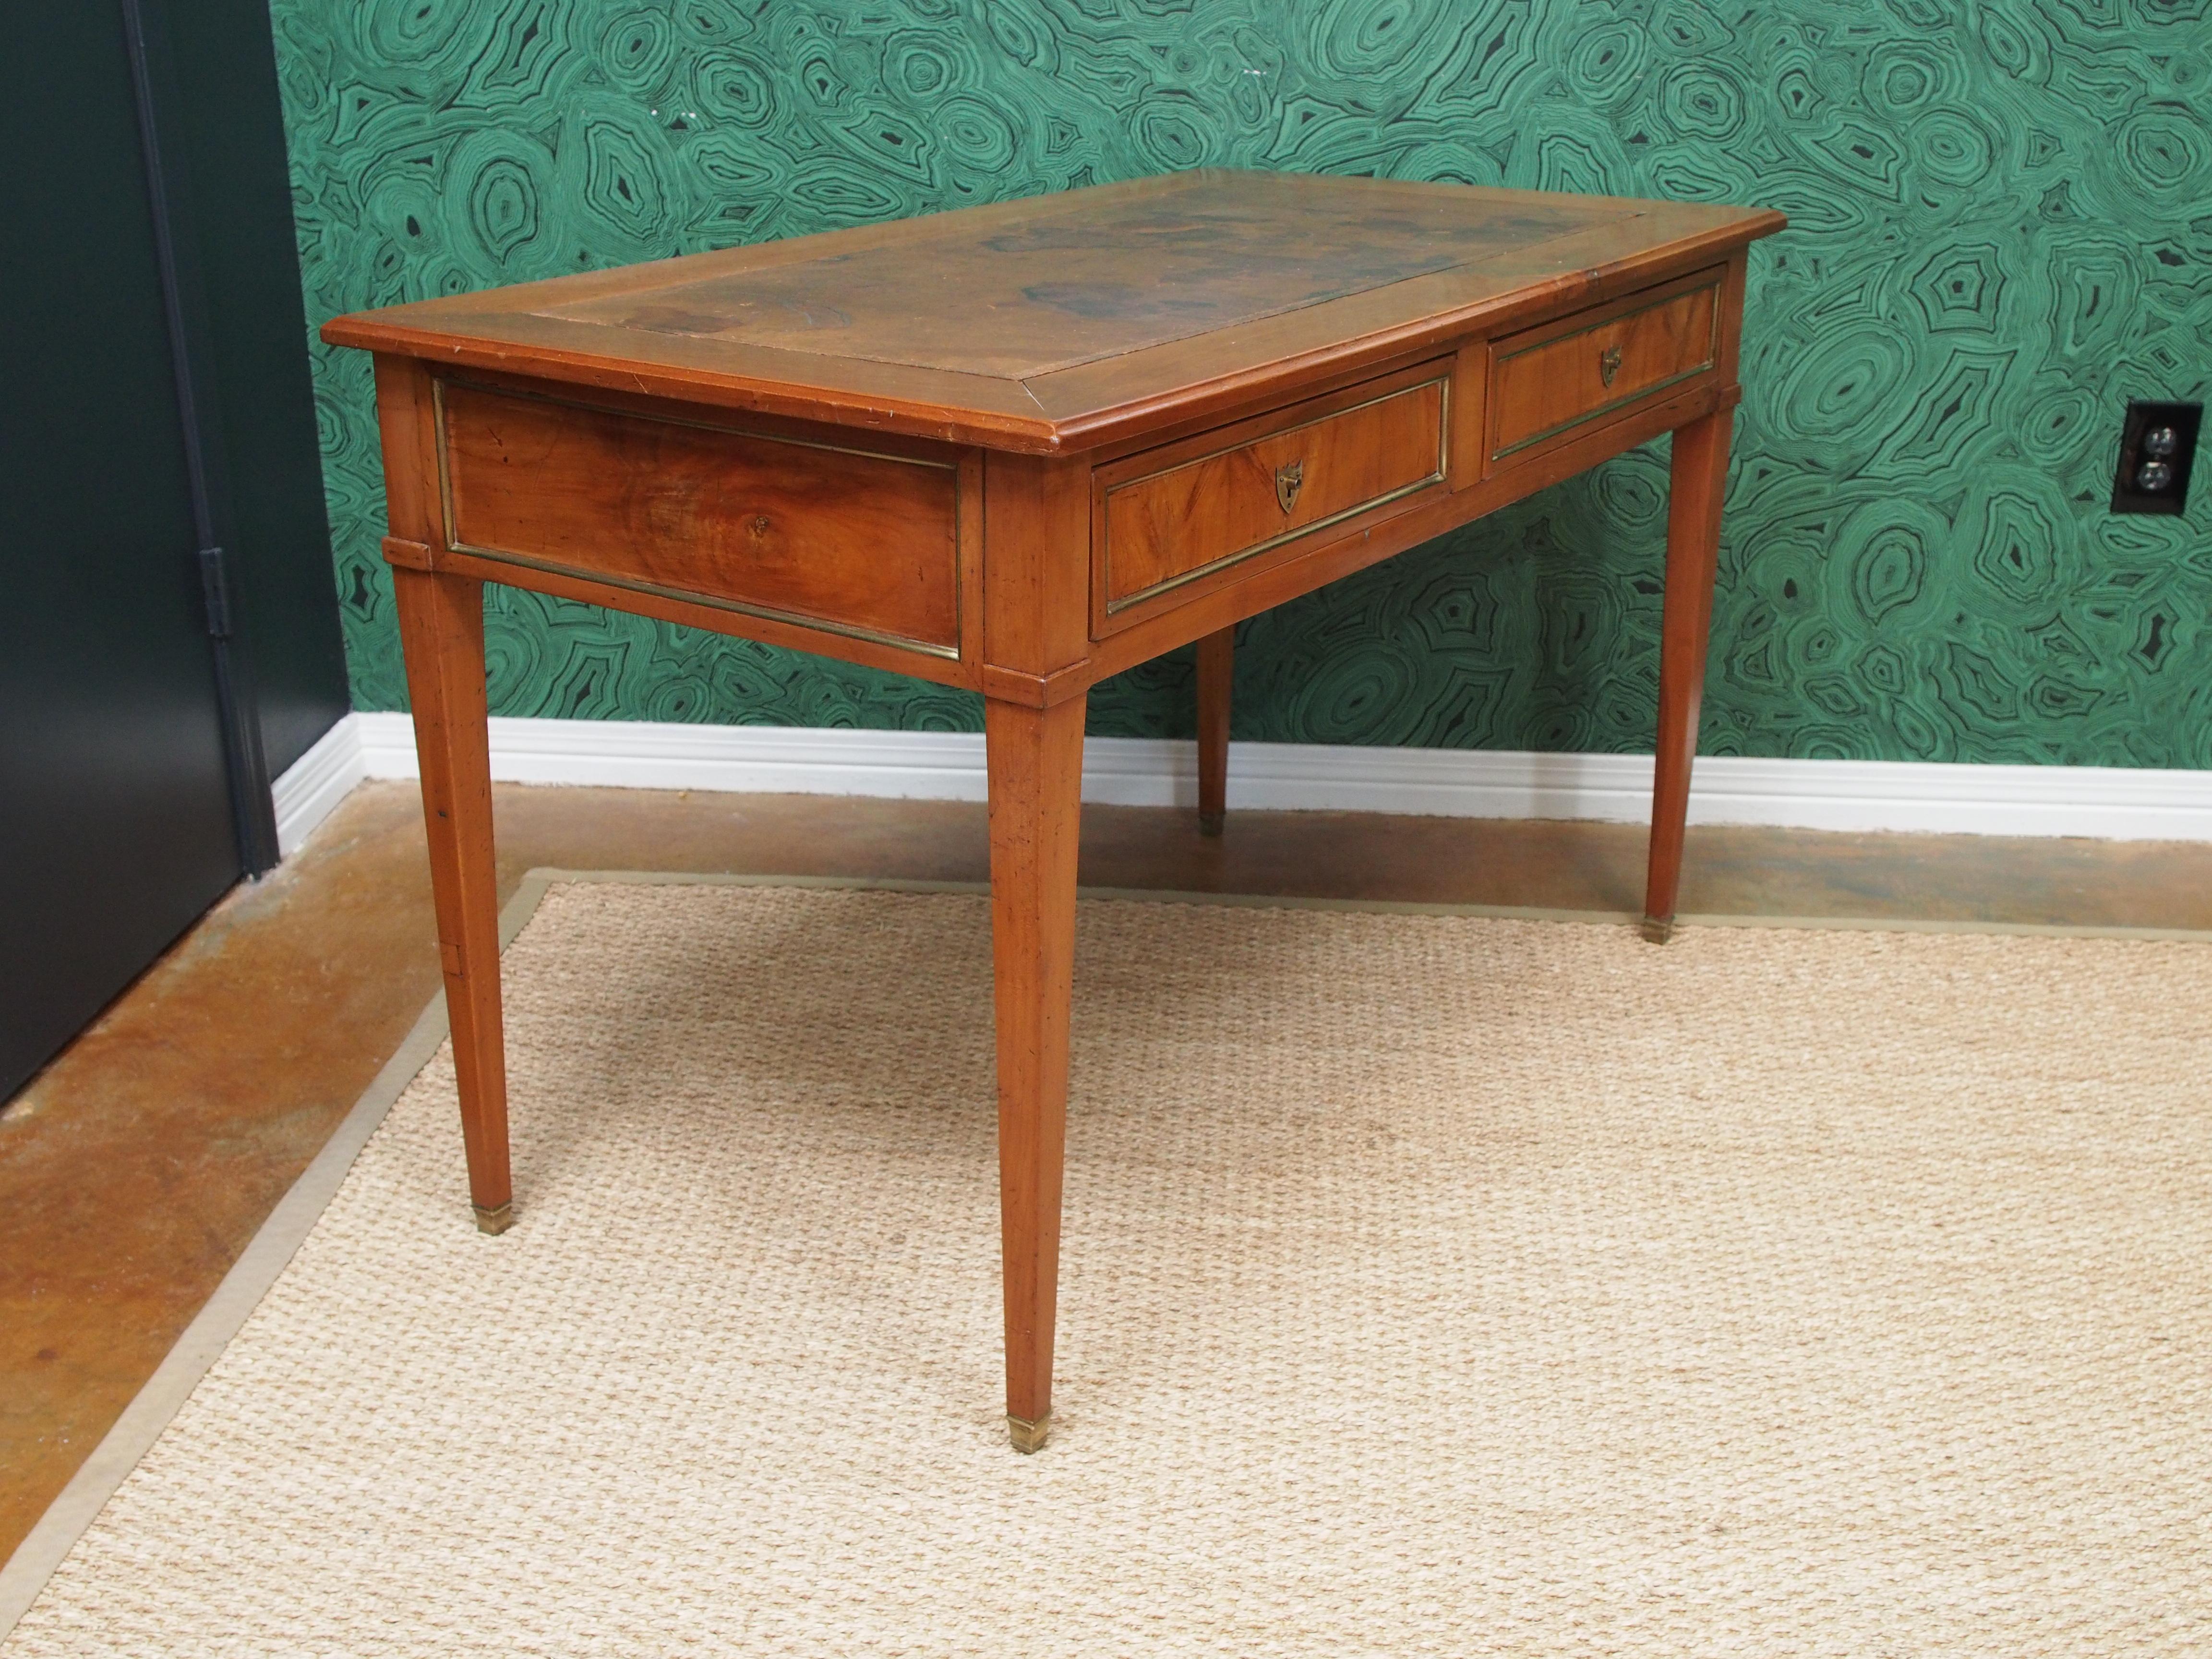 French Empire walnut writing table with tapered legs, brass trim, and original leather top.